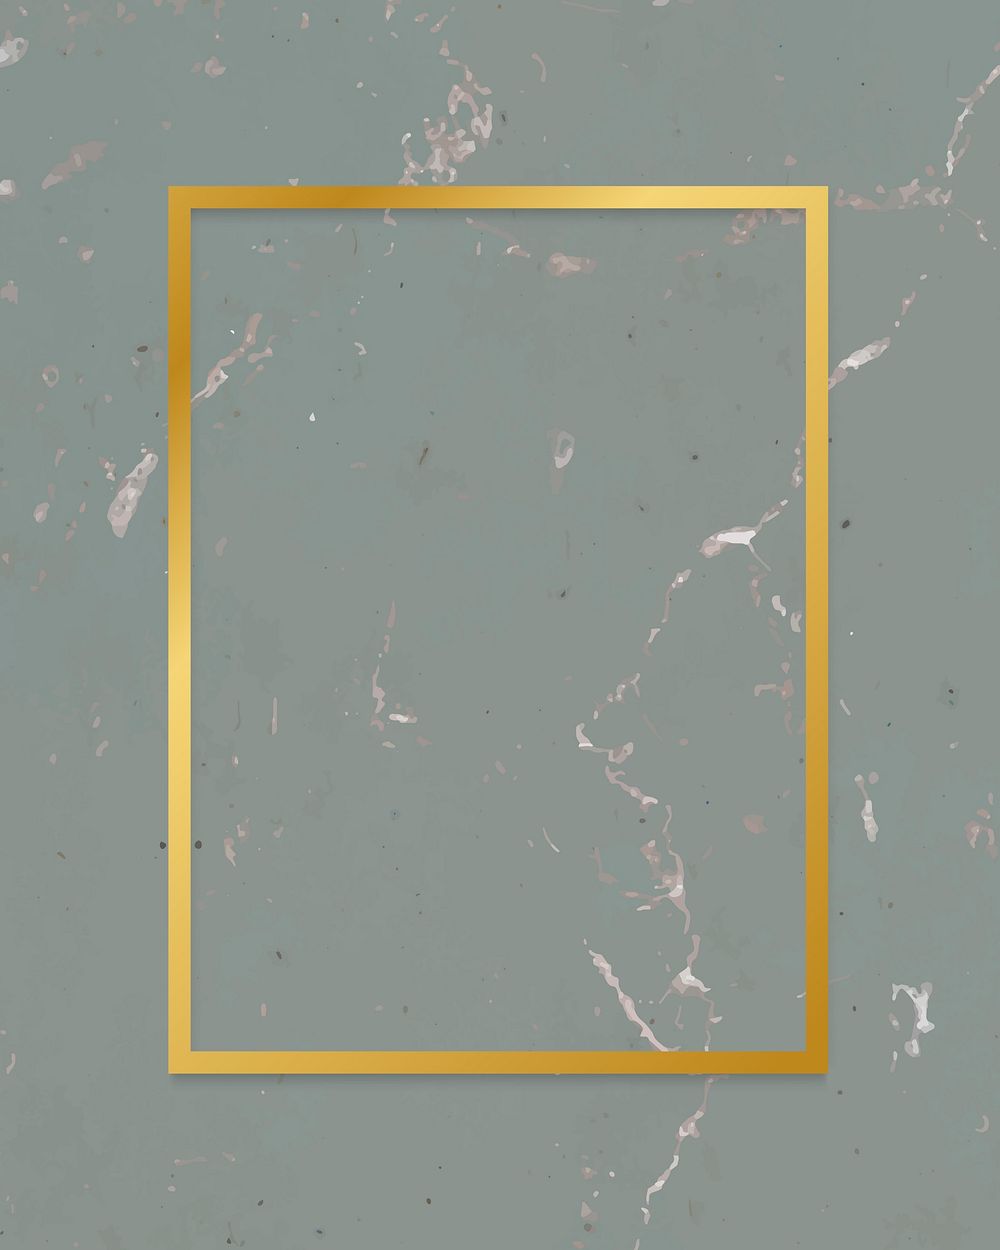 Golden framed rectangle on a marble textured vector